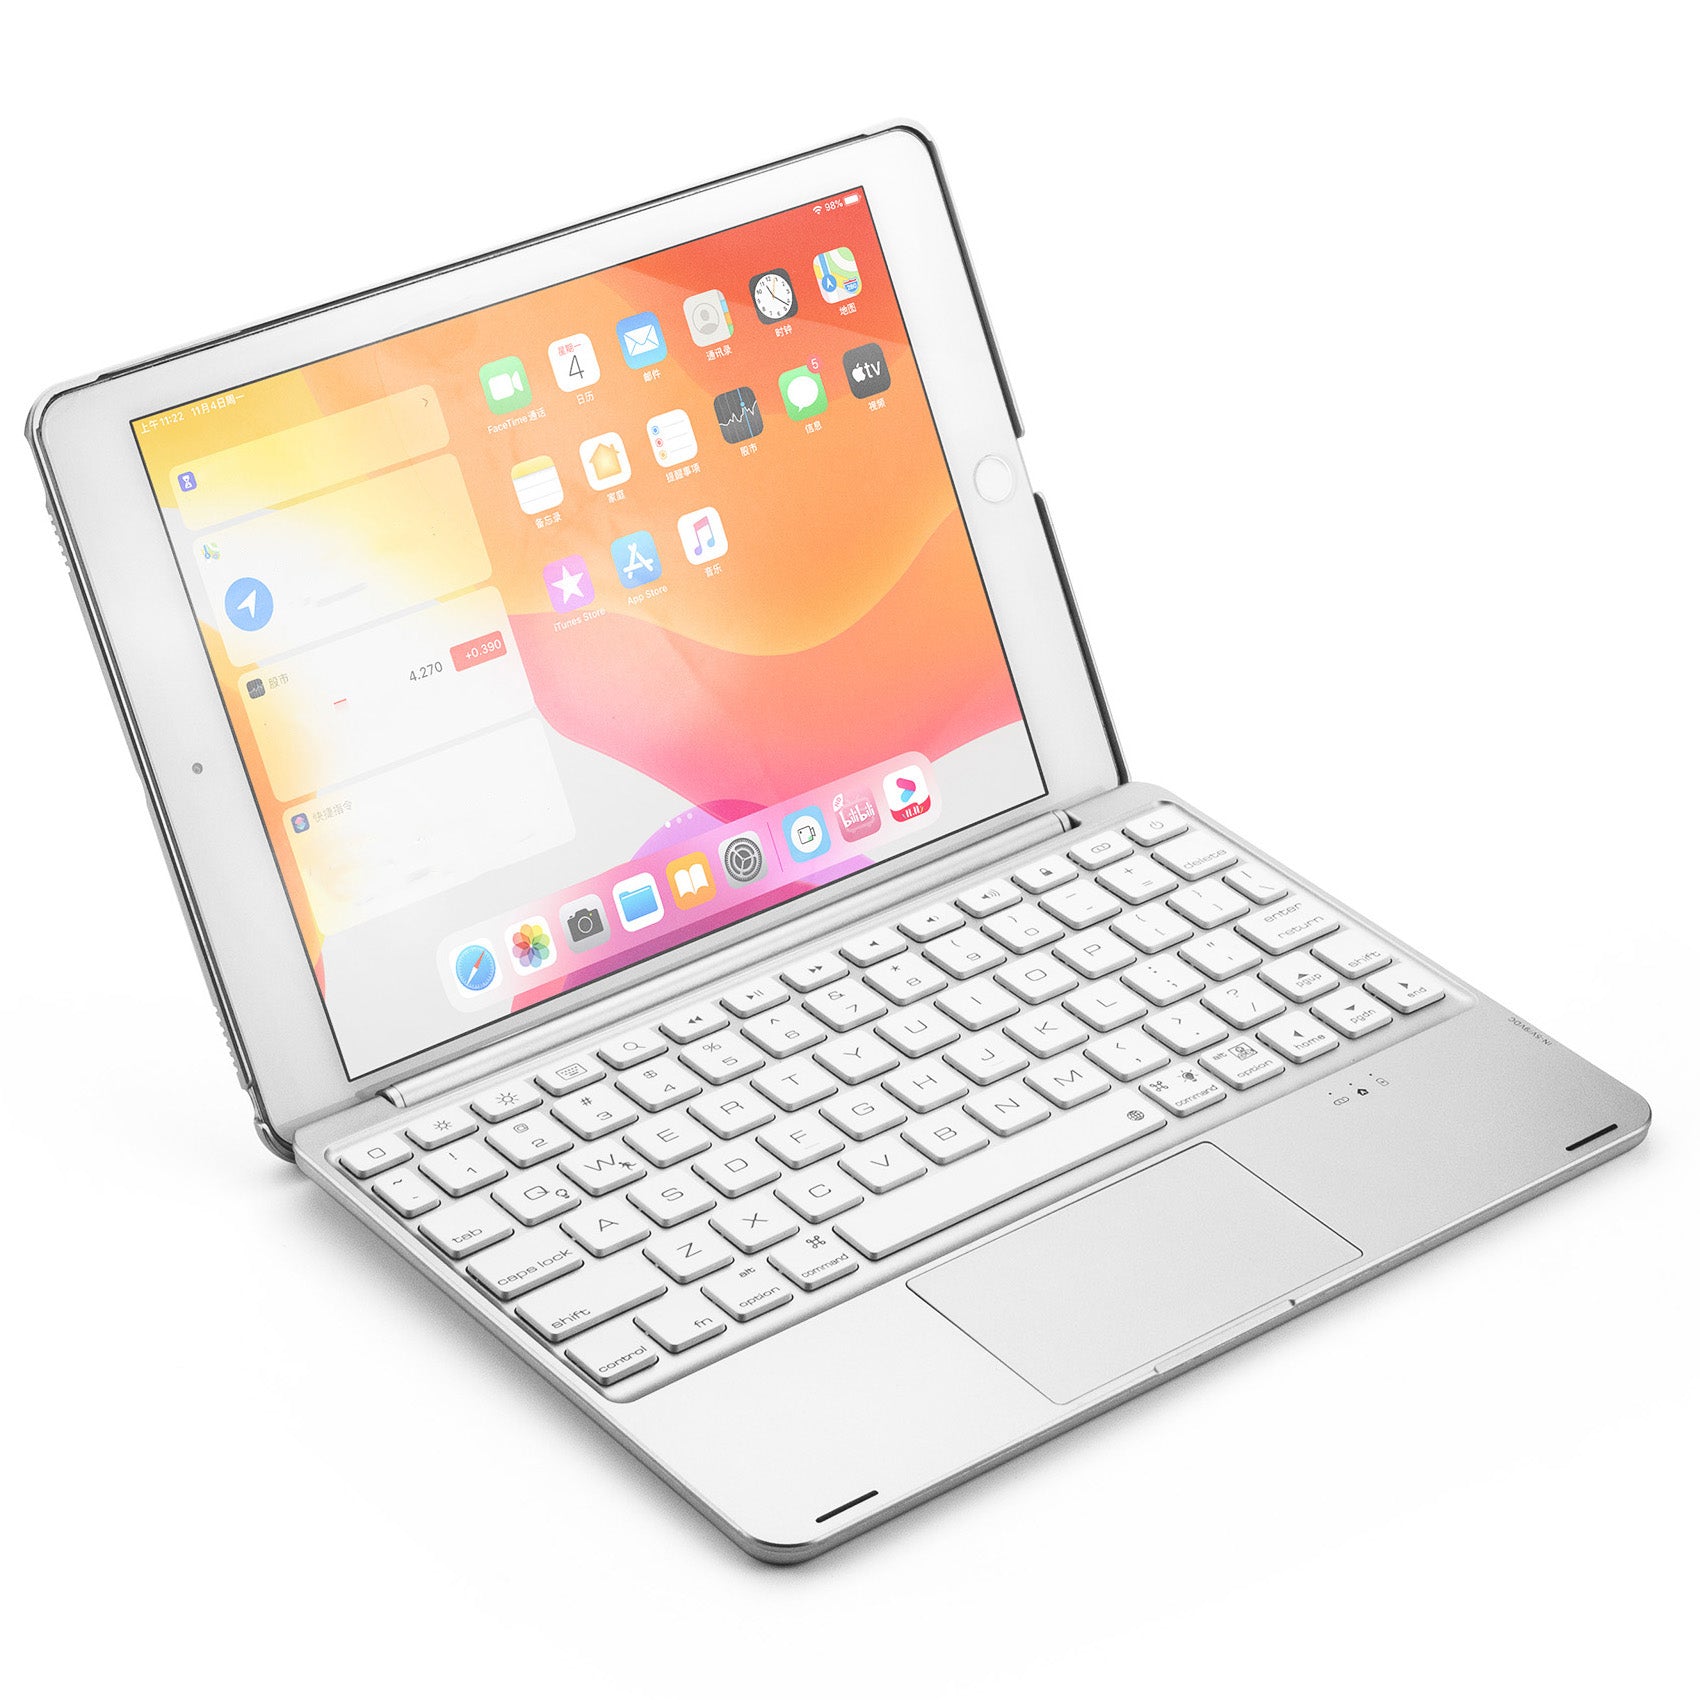 Keyboard Case for 9.7" iPad (5,6,Air1,Air2,Pro) - Gold & Cherry